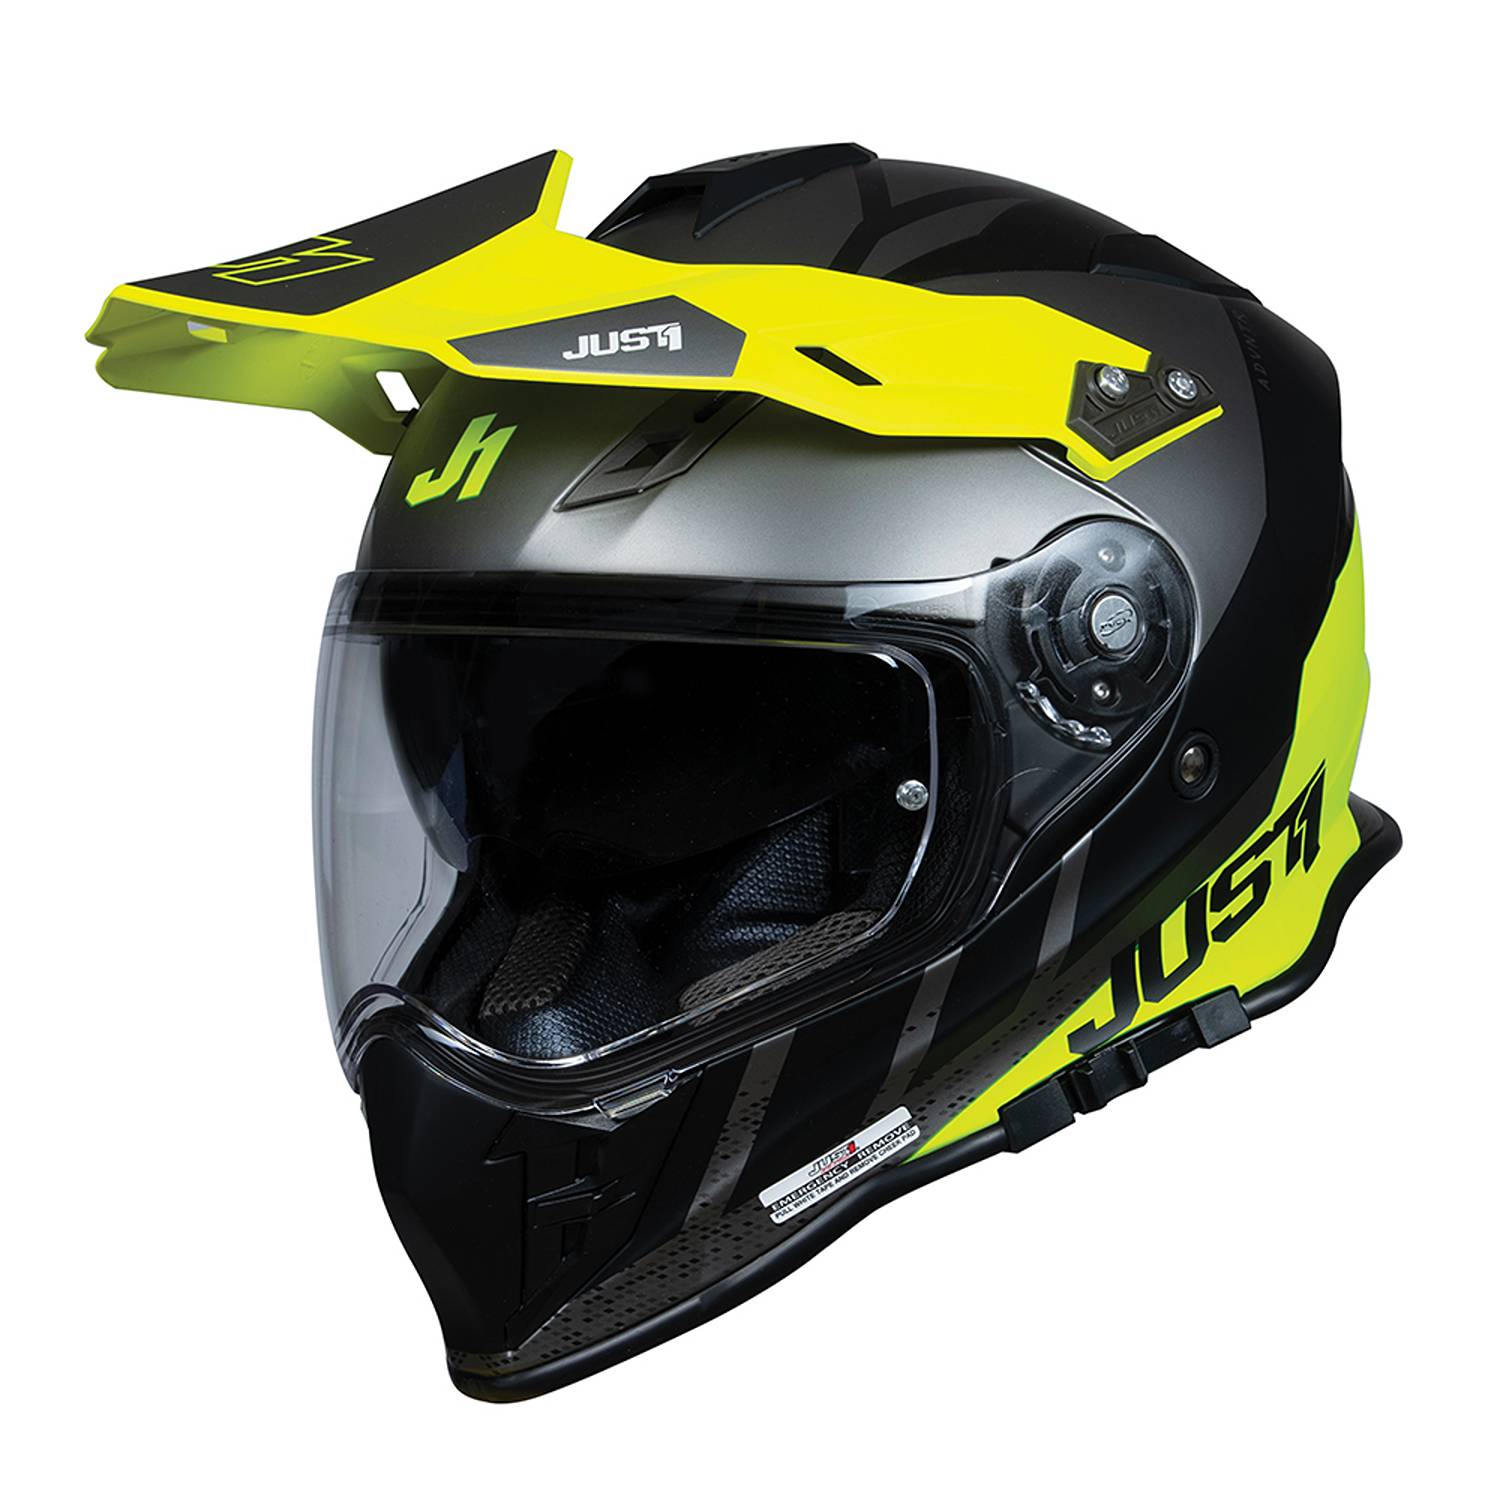 Image of Just1 J34 Pro Outerspace Jaune Vert Titane Aventure Casques Taille L